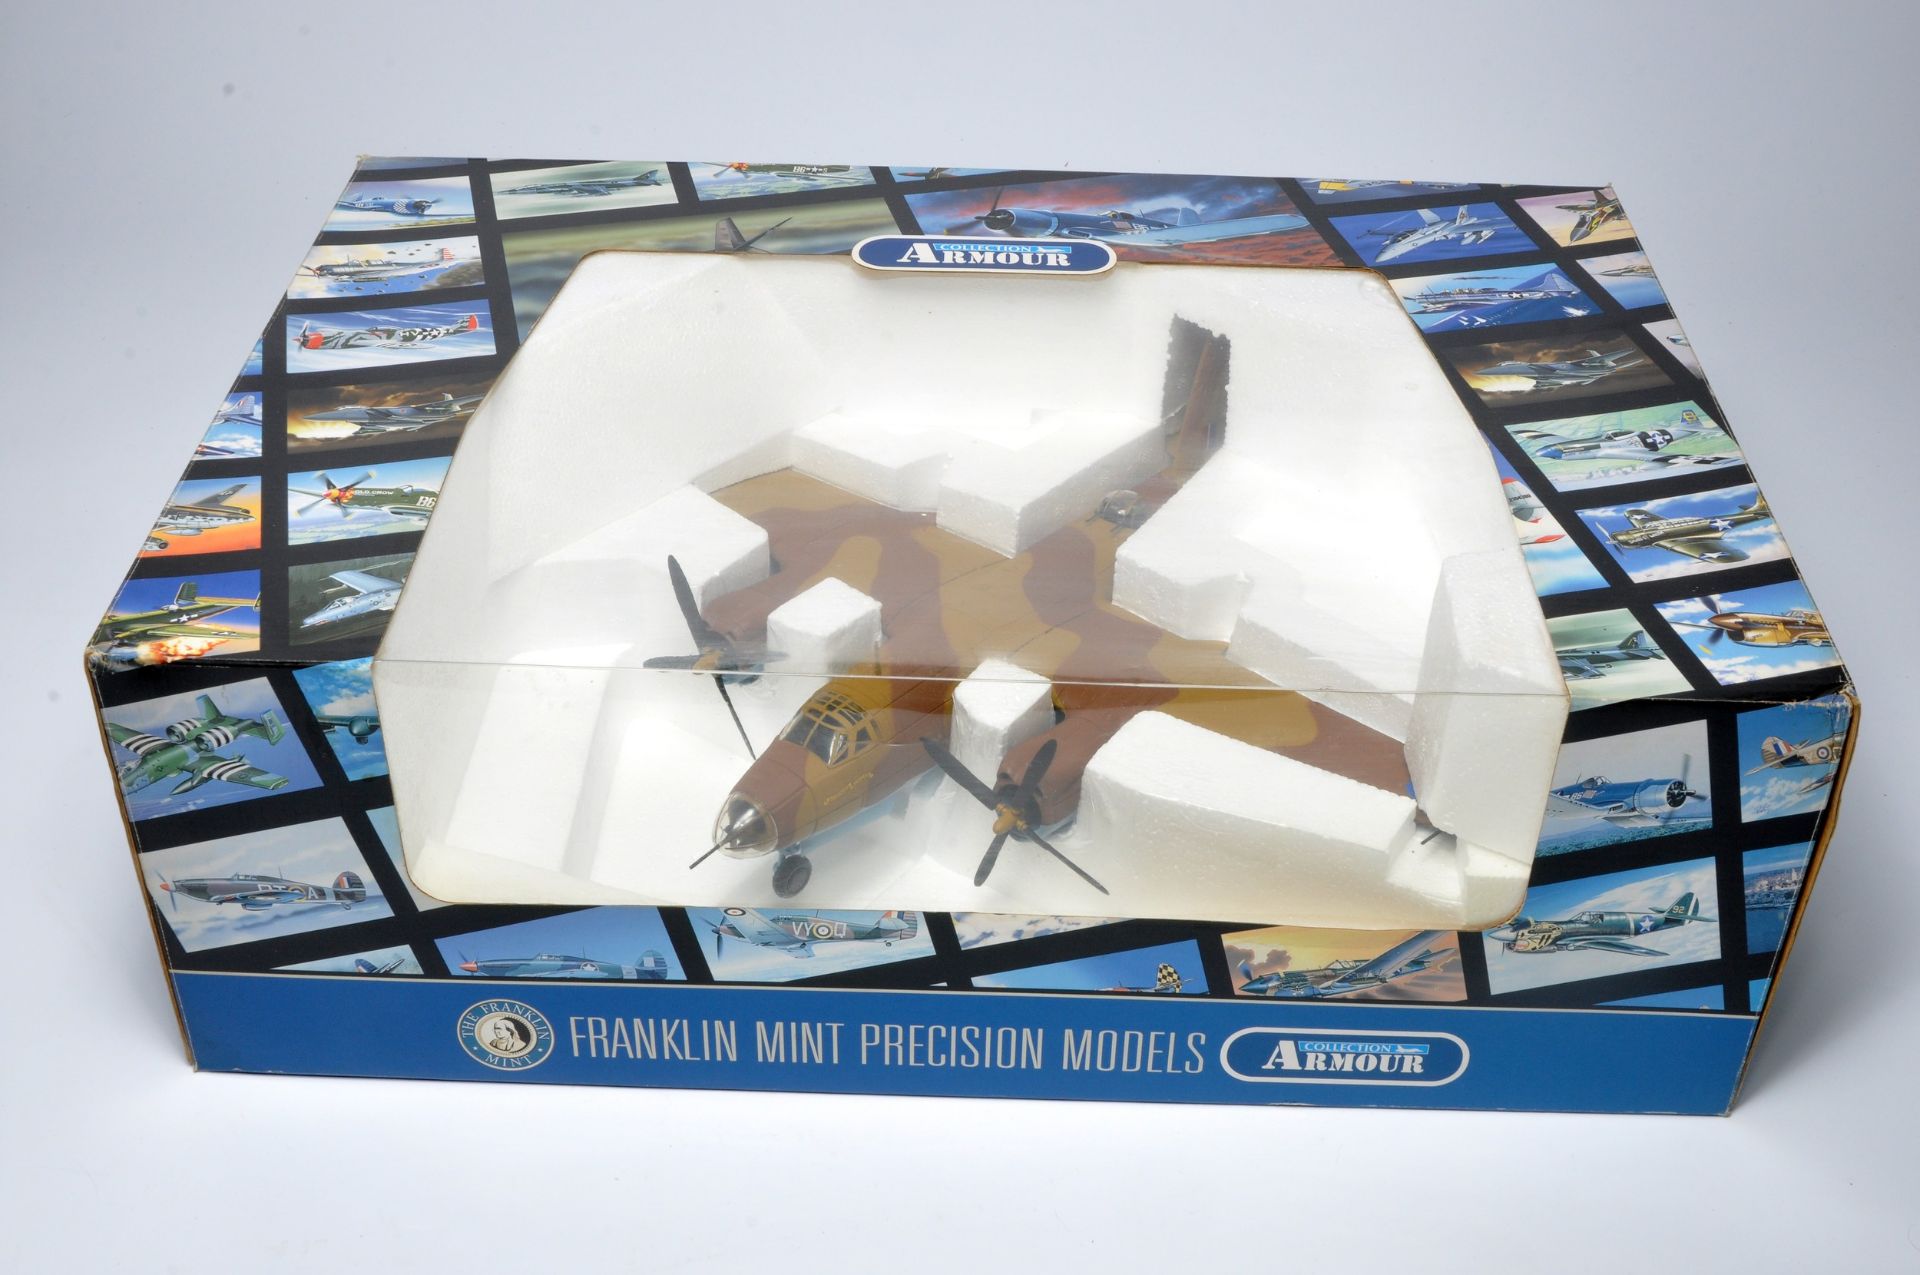 Franklin Mint 1/48 diecast model aircraft issue comprising No. B11E054 B26 Marauder. Looks to be